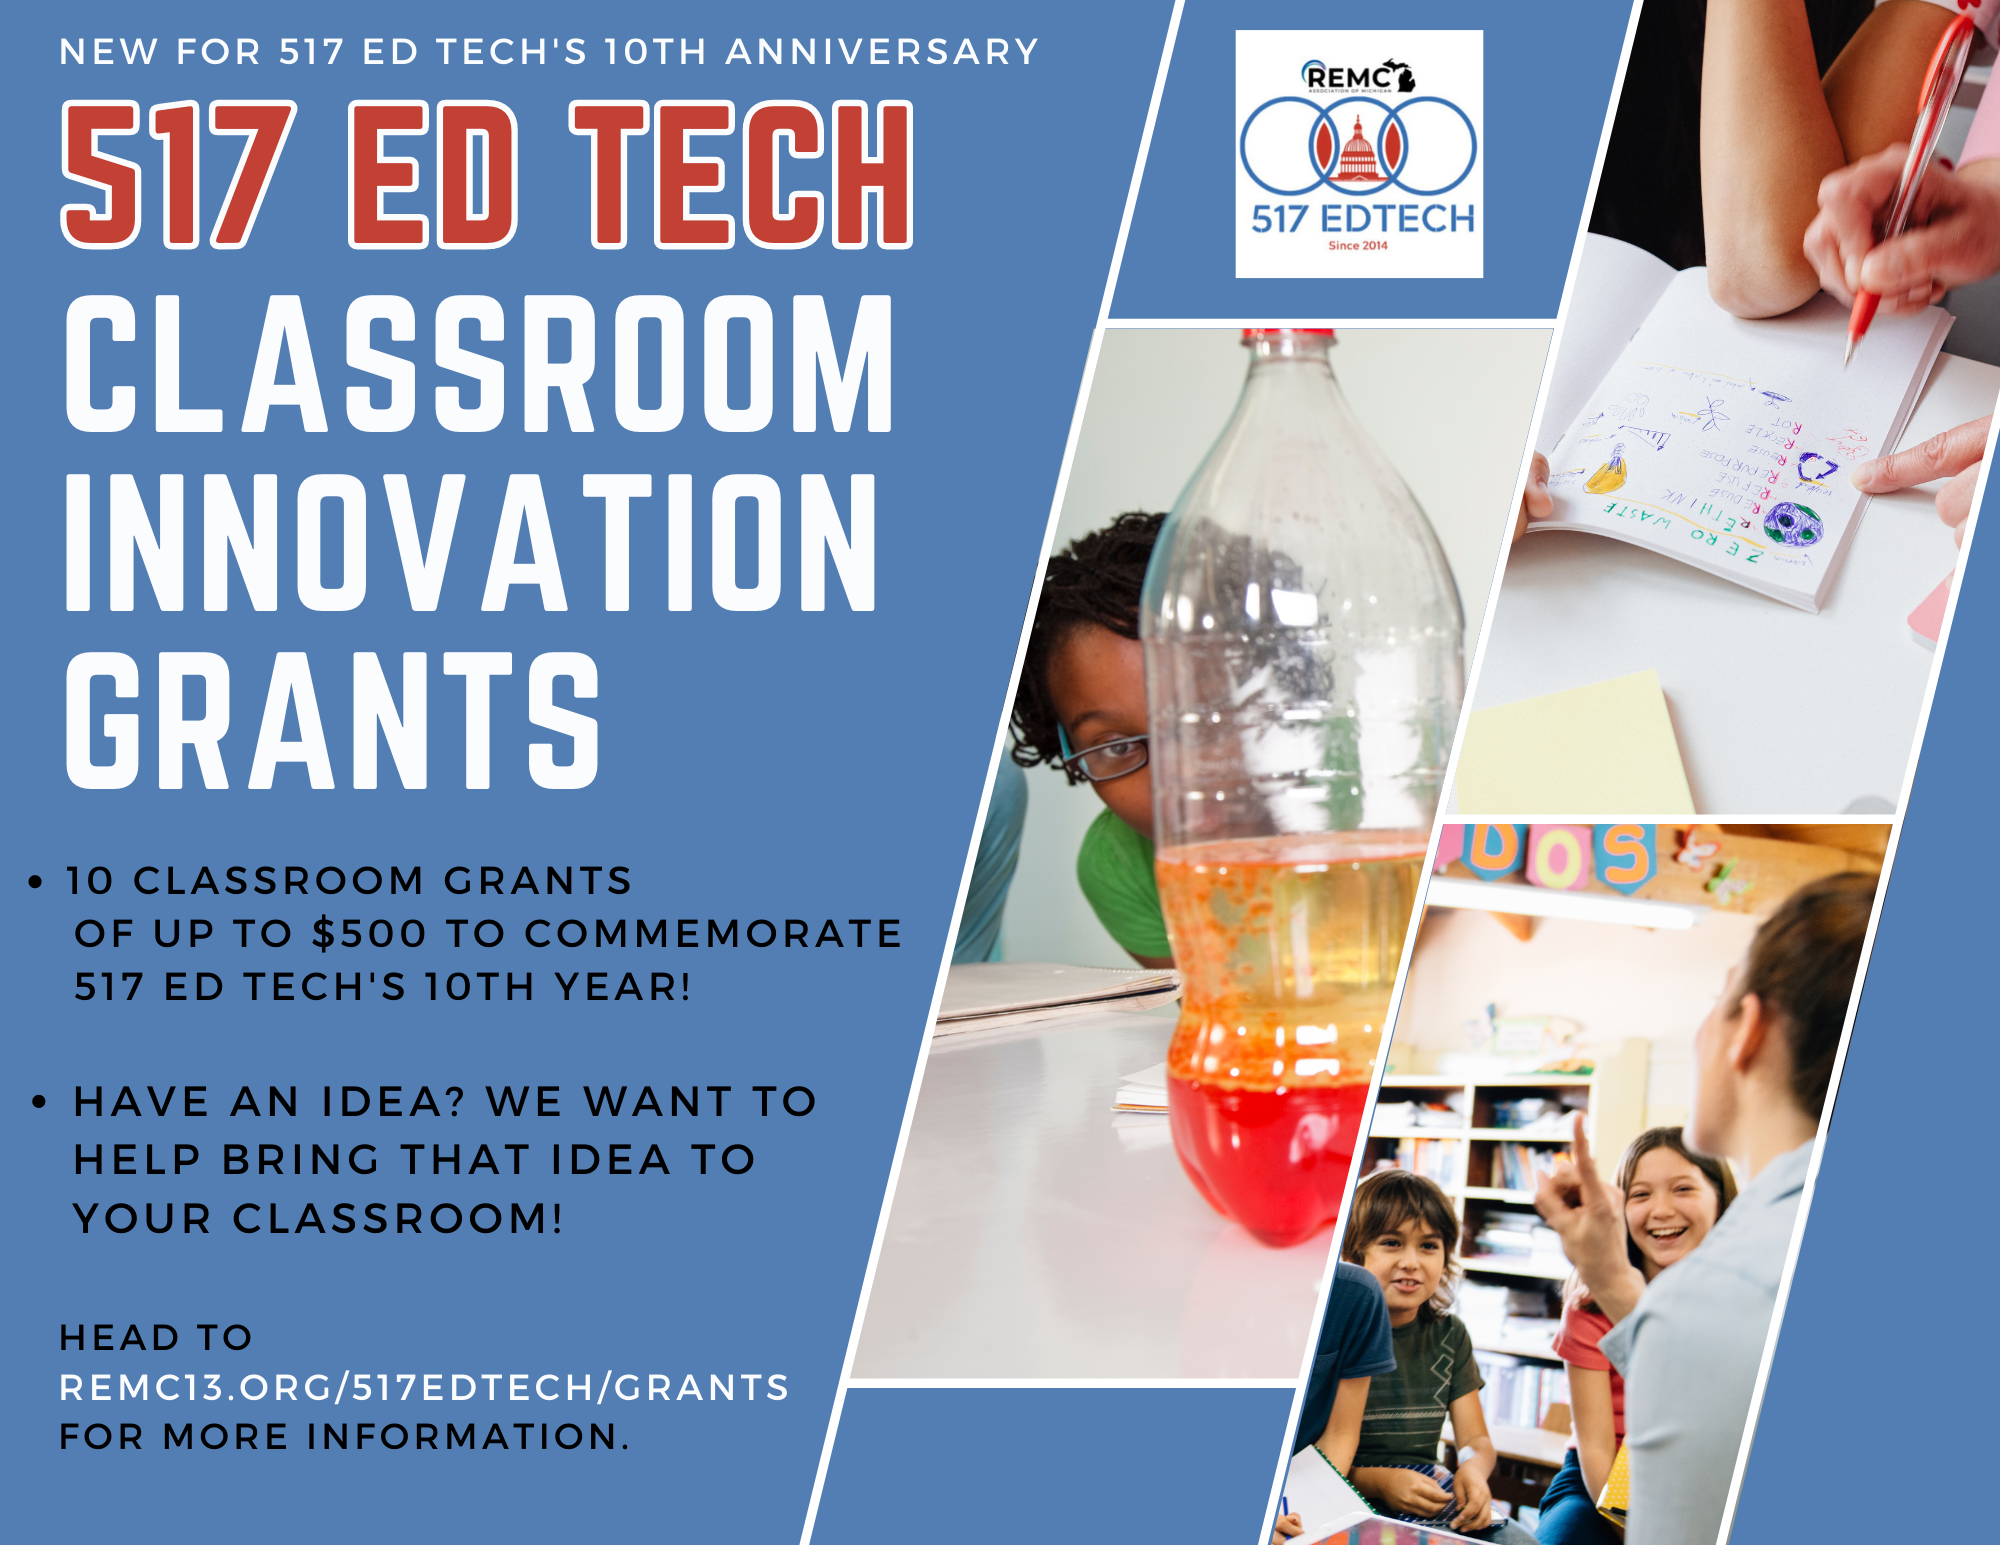 Introduction Image to 517 Ed Tech Classroom Innovation Grants